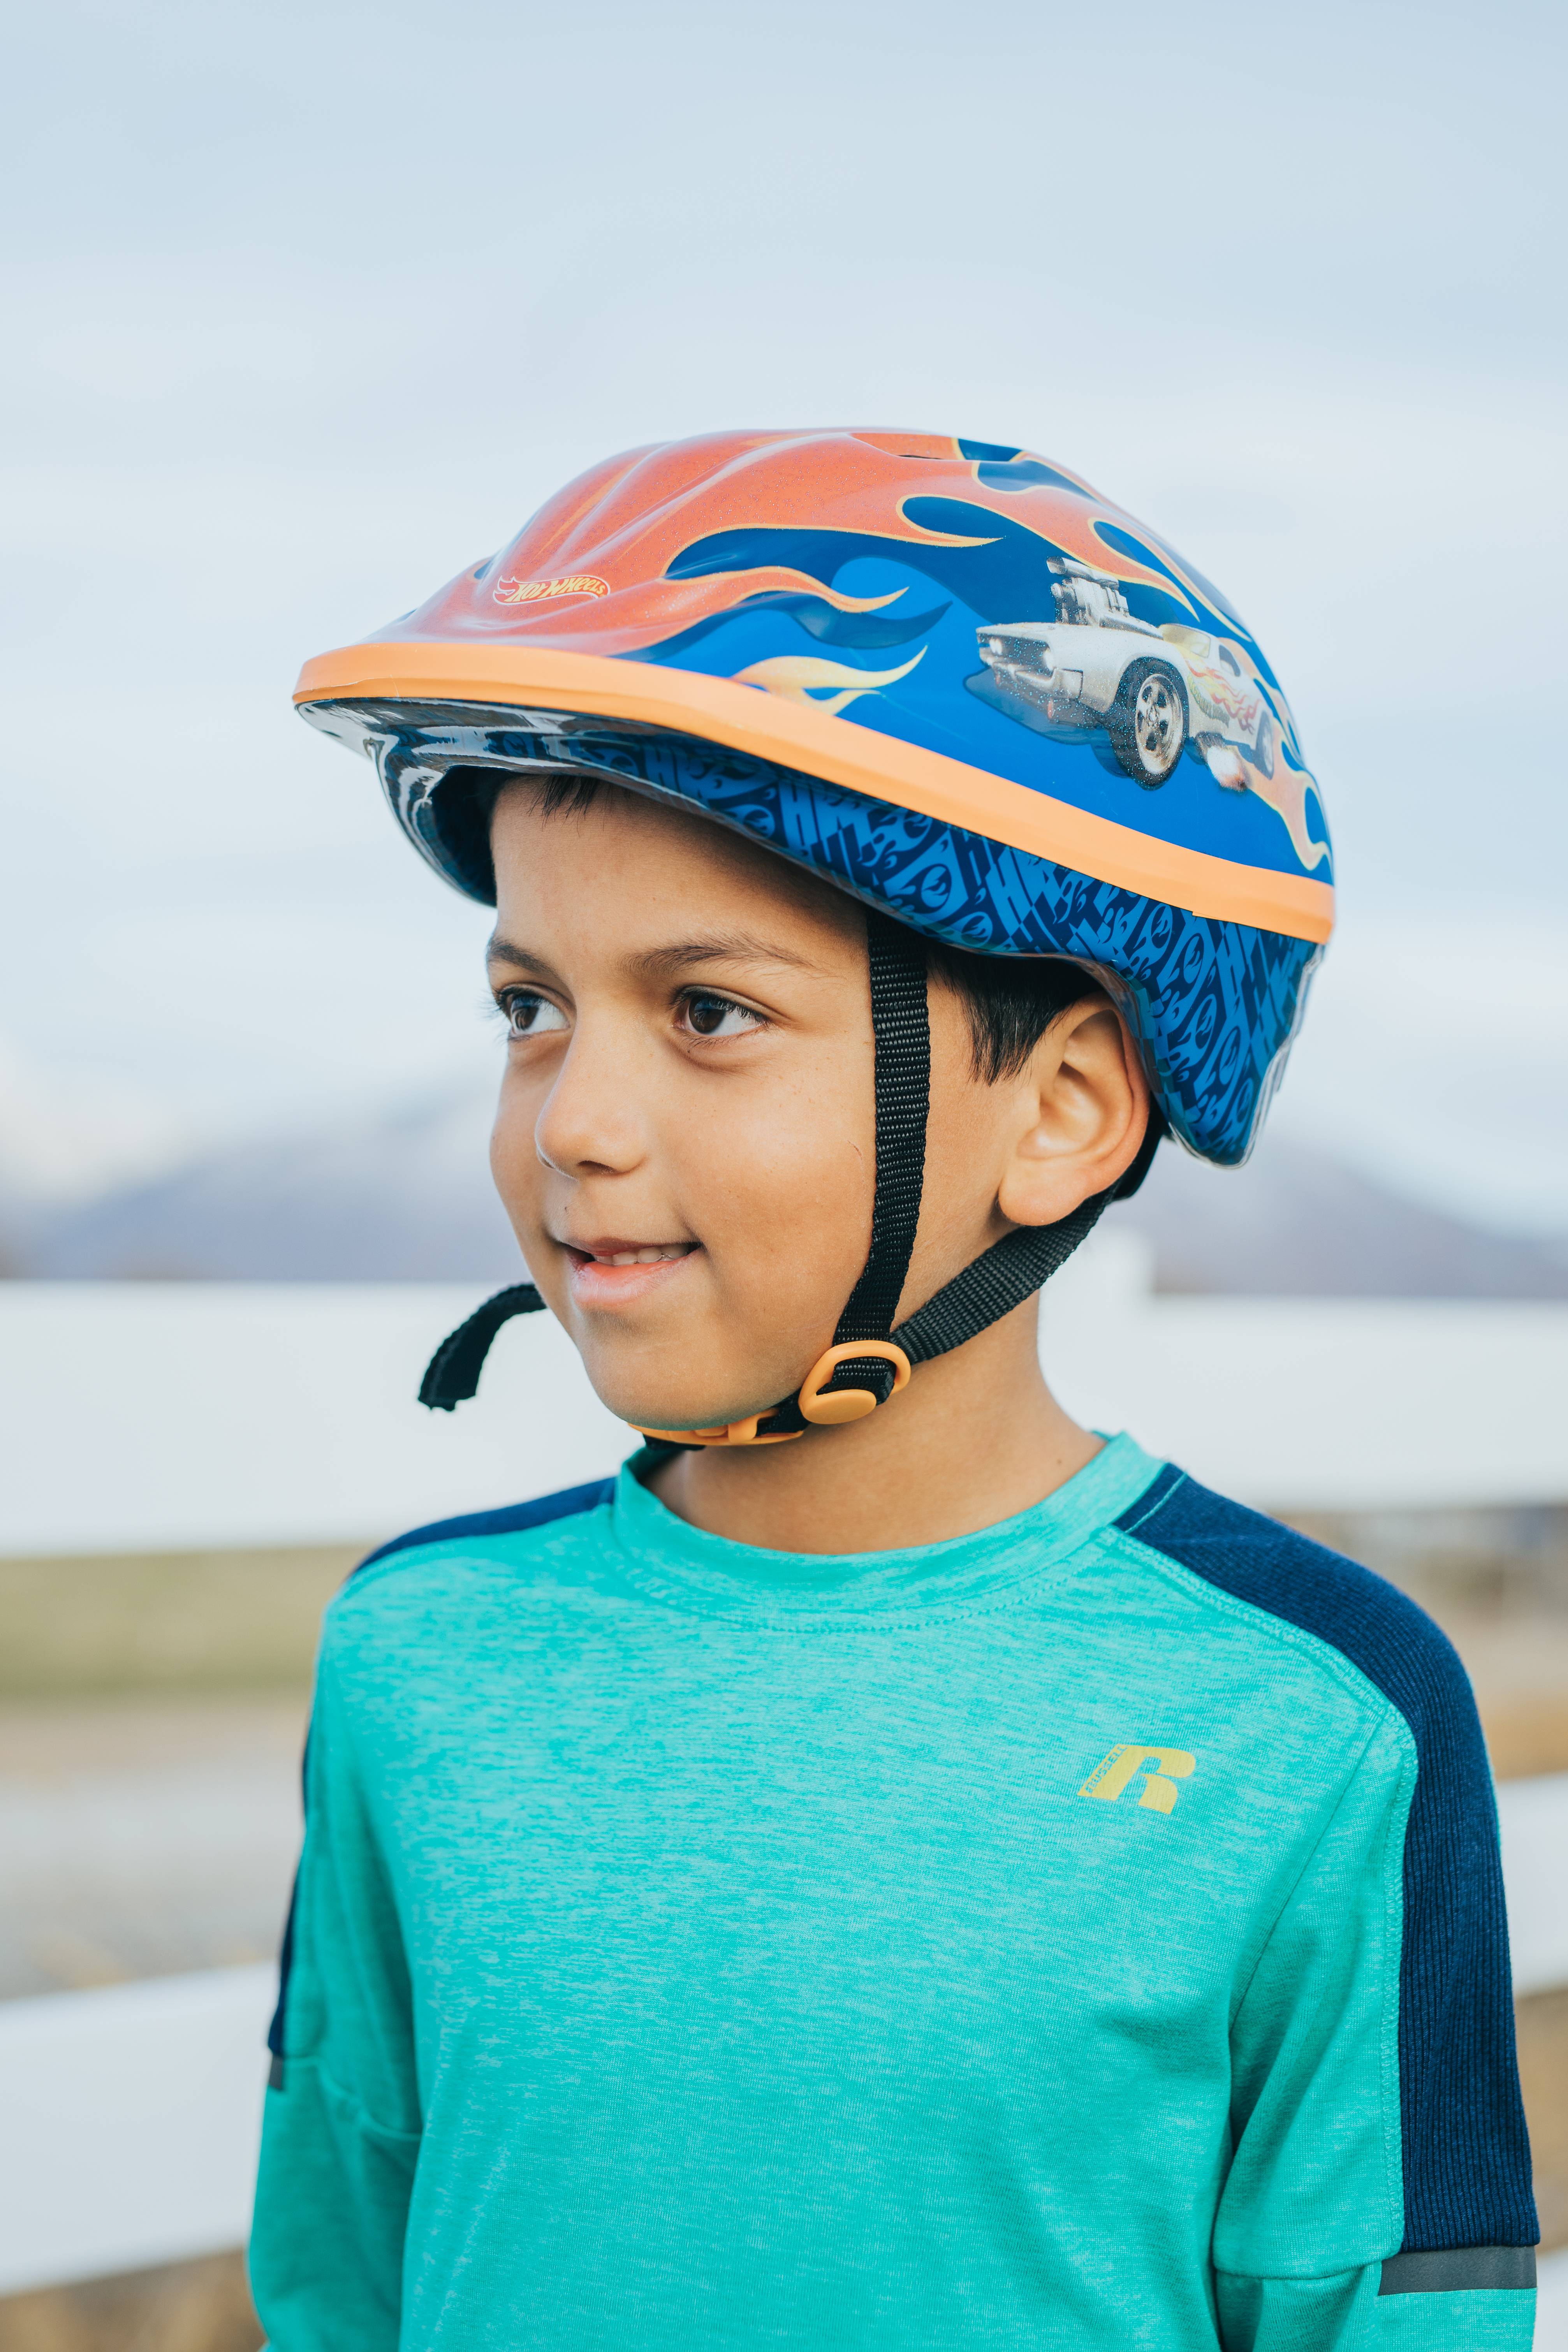 Hot Wheels Helmet with Surprise Bonus Car for Bikes, Skateboards and Scooters, Ages 5+ - image 4 of 10